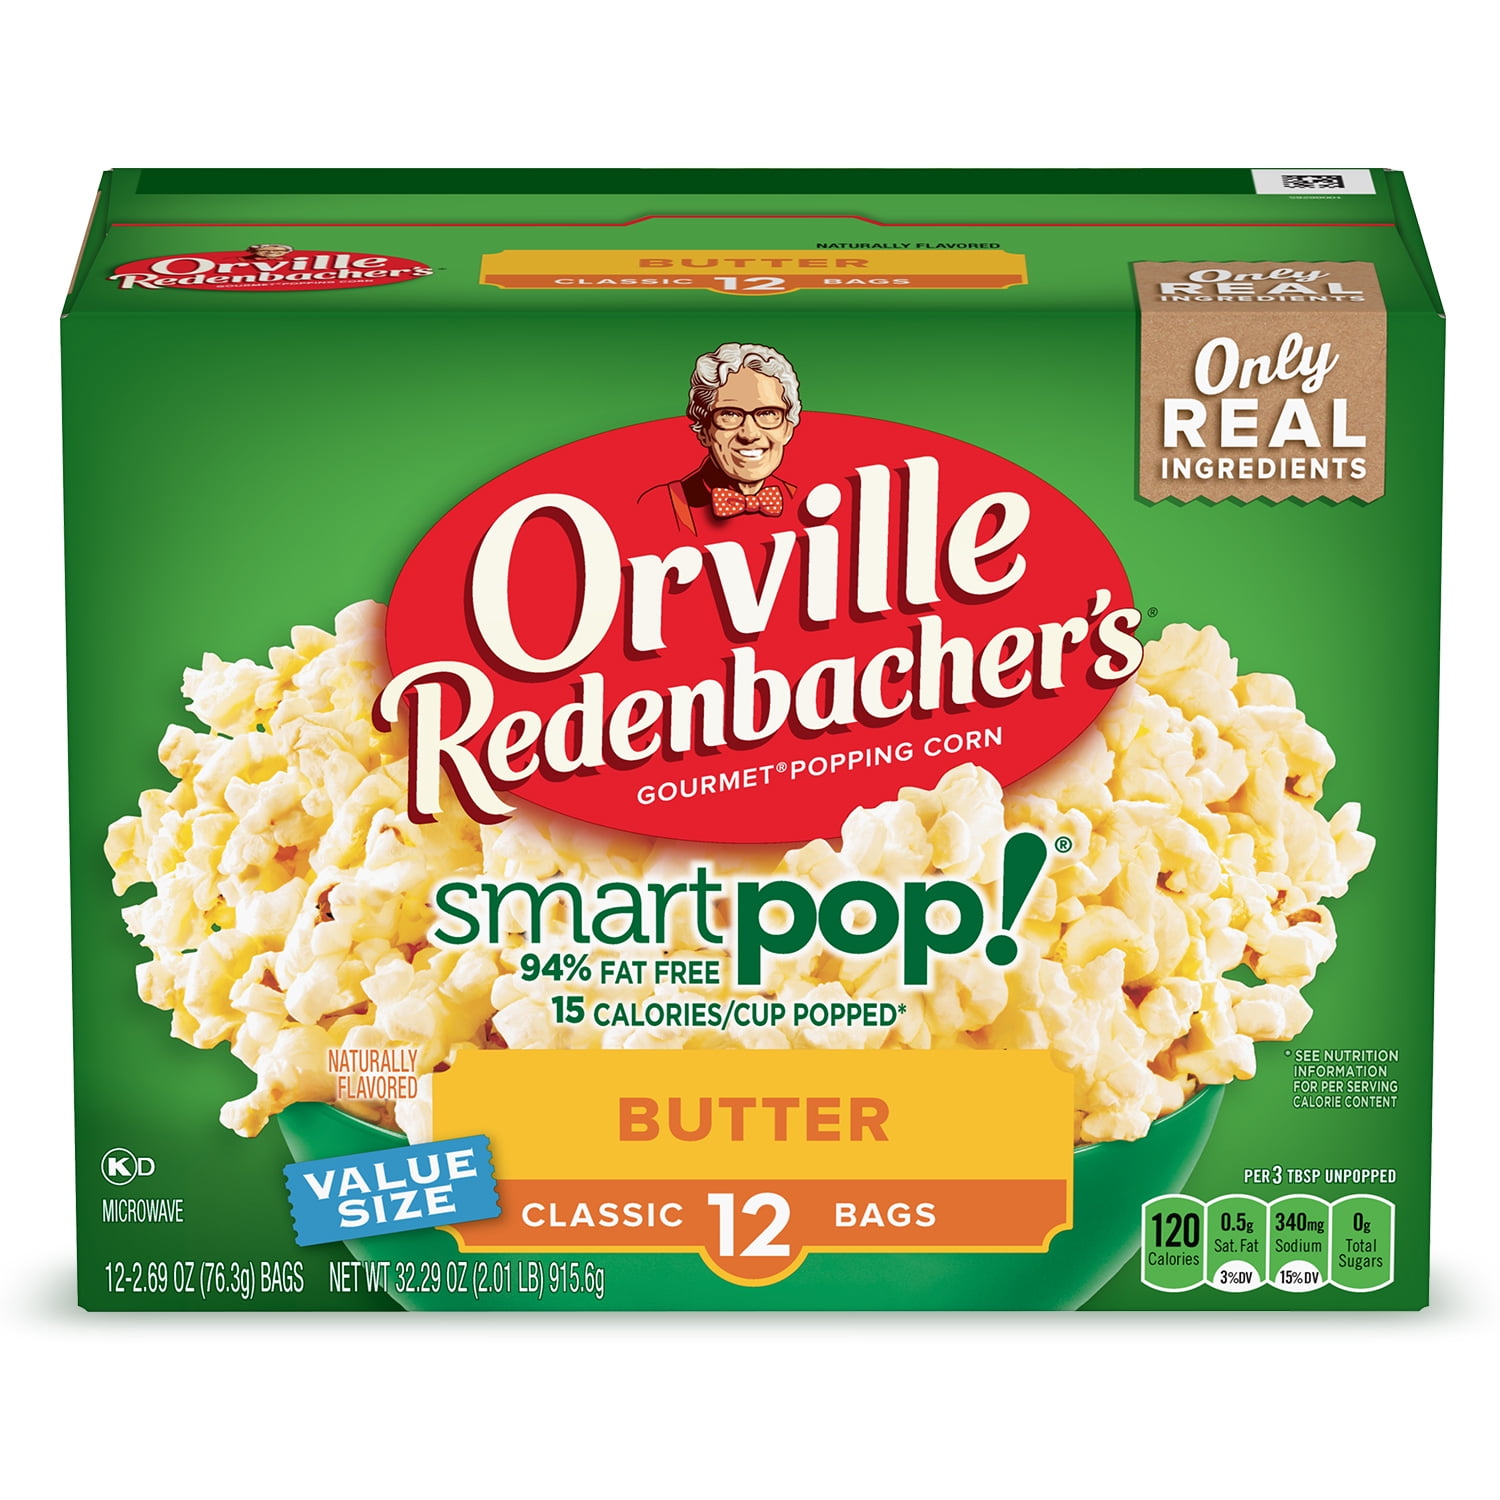 SKINNY POP 100-Calorie Popcorn Bags, 24 ct. Box at Tractor Supply Co.